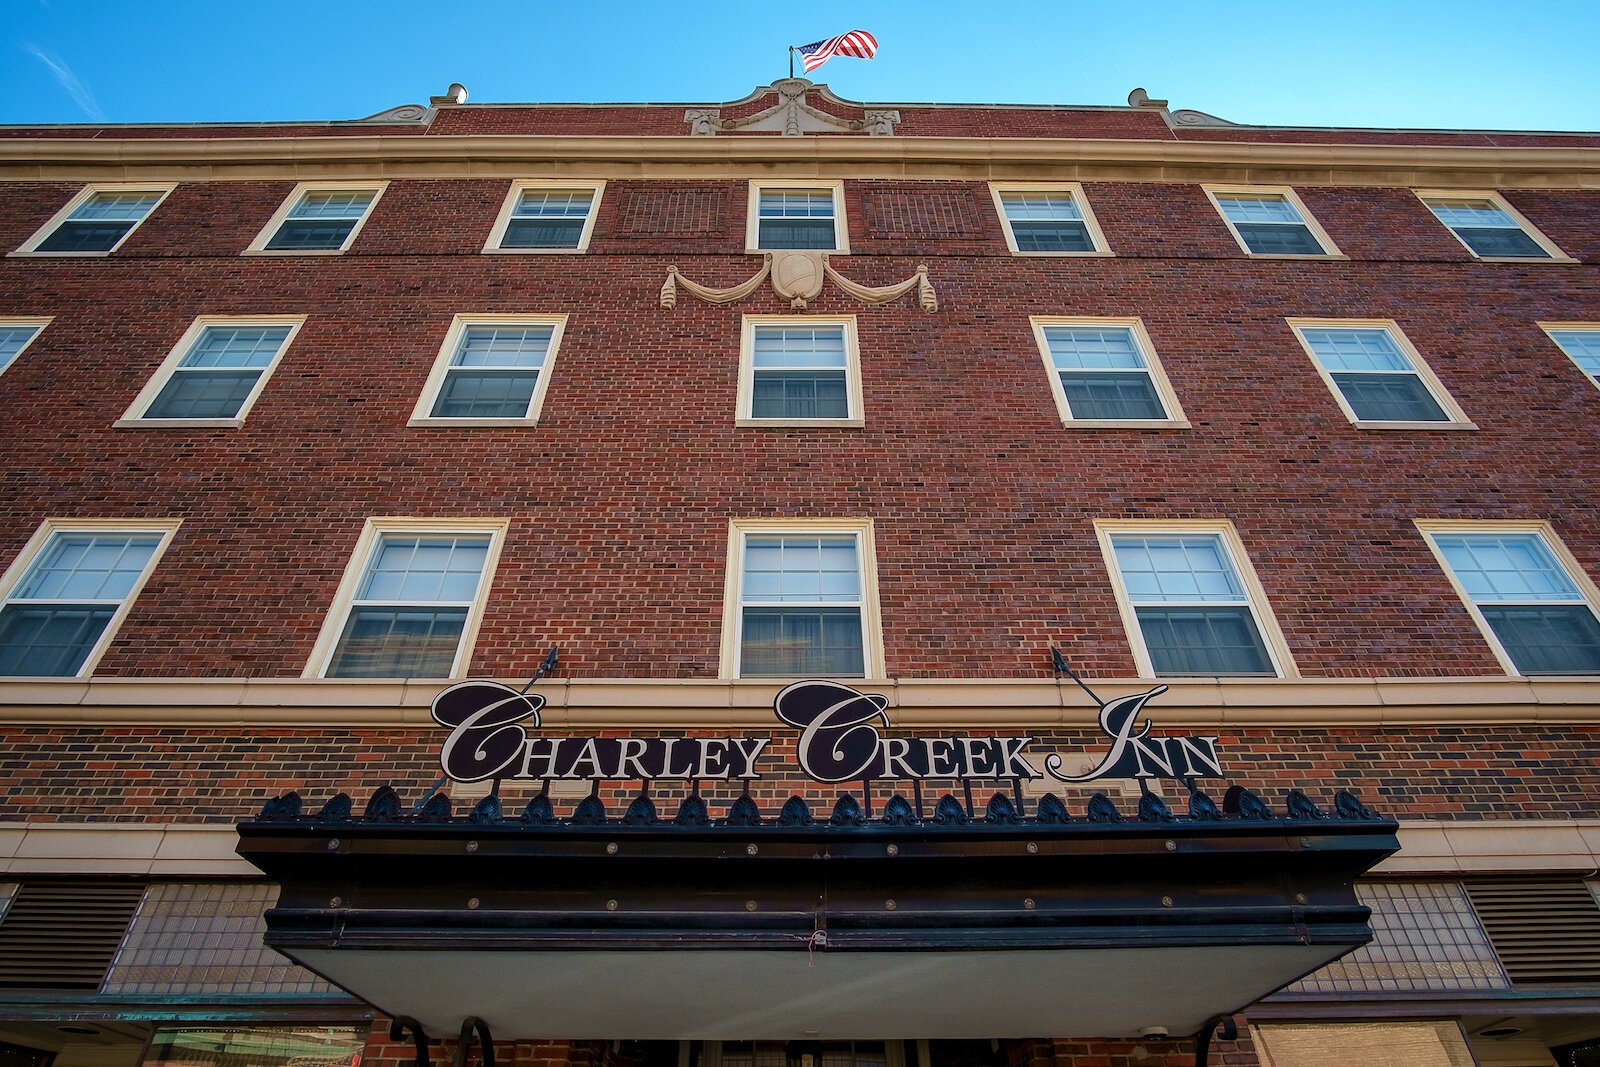 The exterior of the Charley Creek Inn at 111 W. Market St. in Wabash.